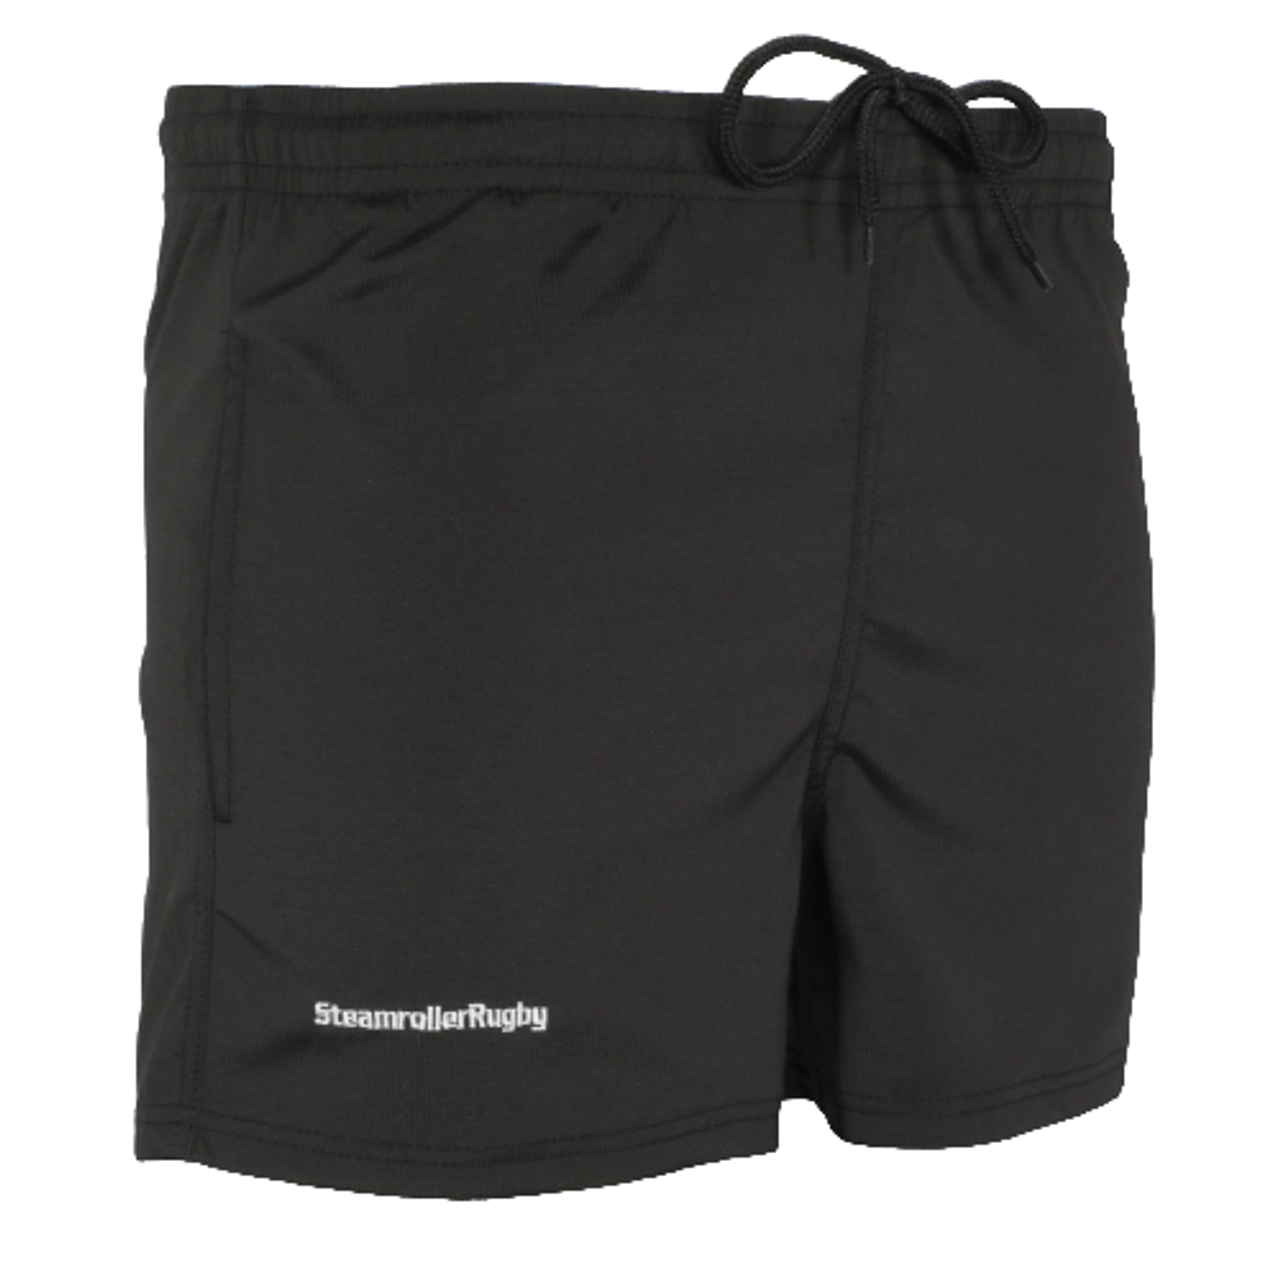 RSV Pocketed Performance Rugby Shorts, Black